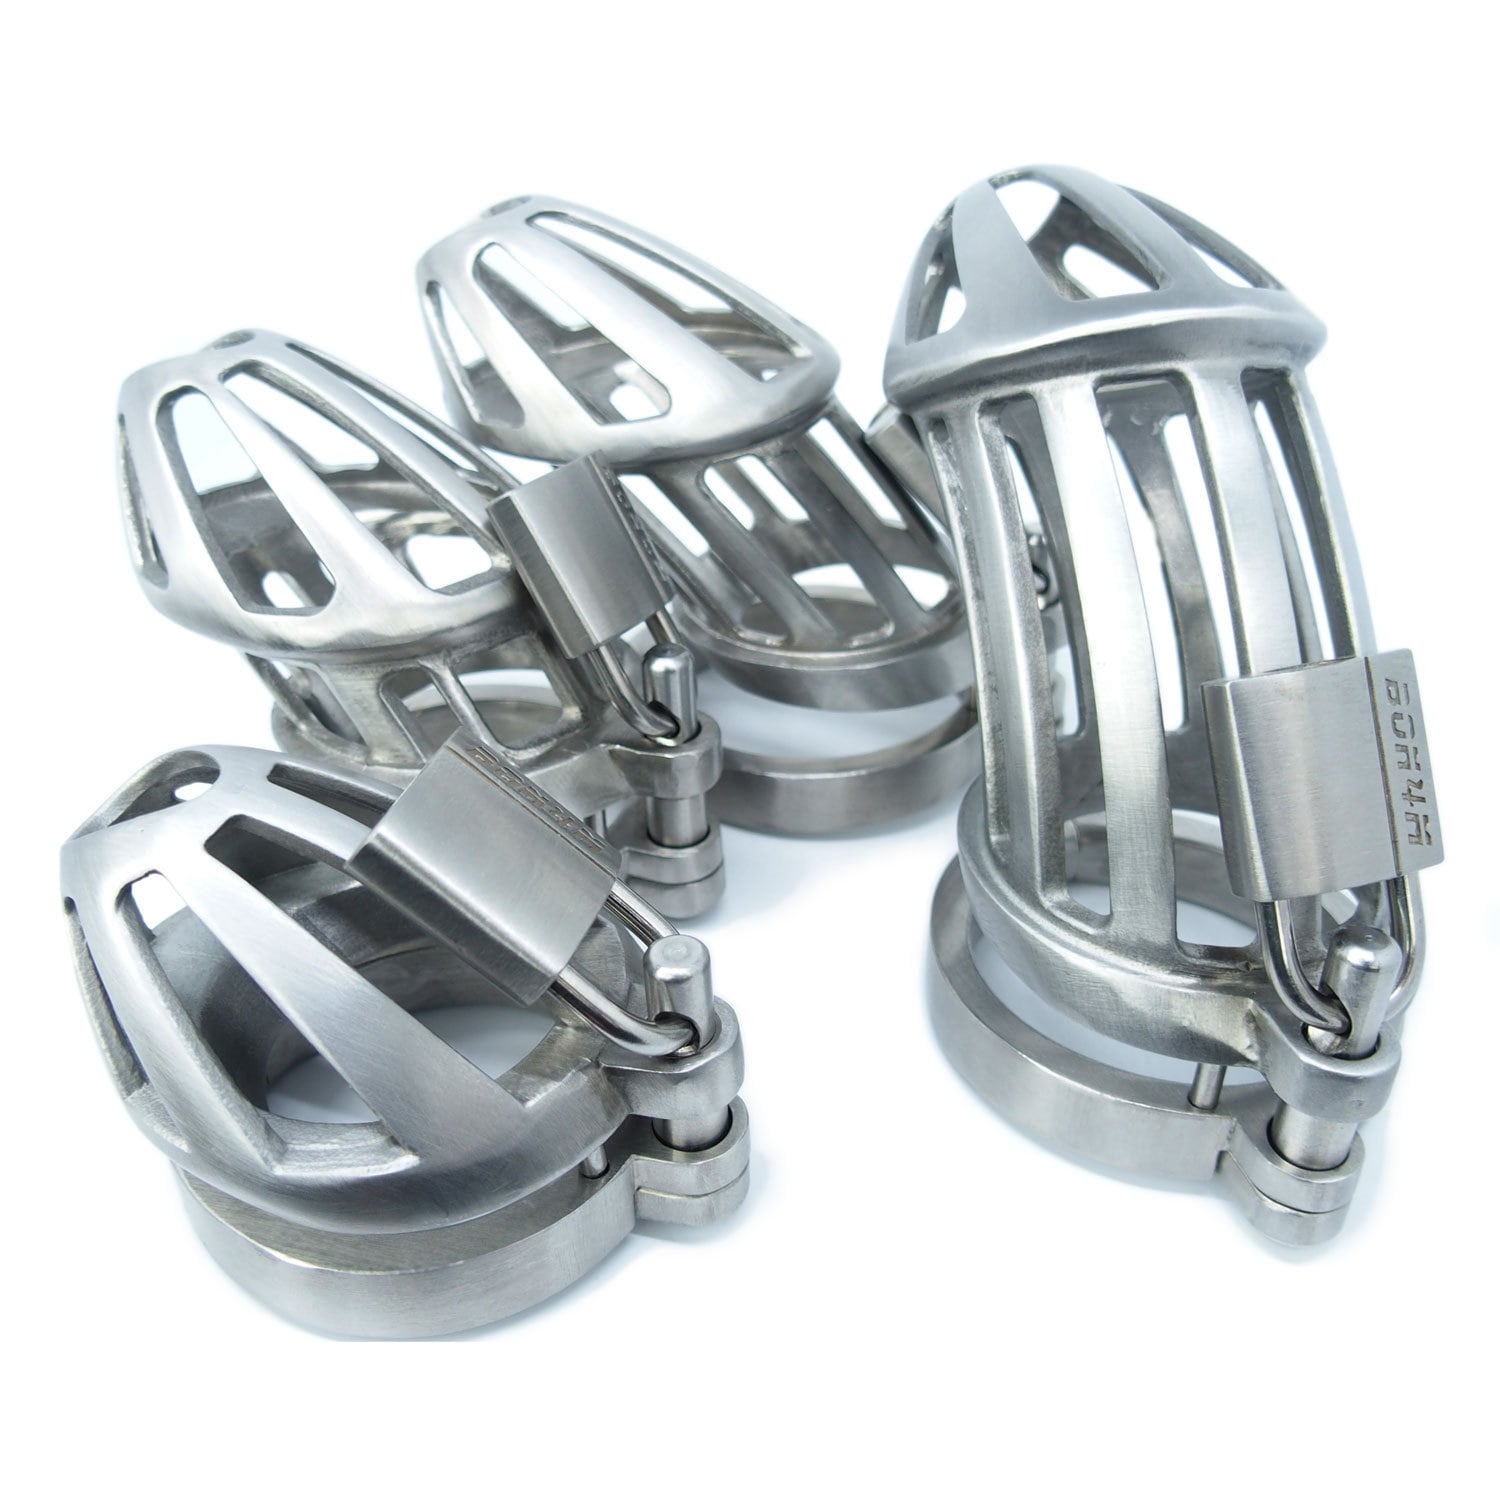 Bon4max High Quality Male Chastity Package in Stainless Steel - Etsy